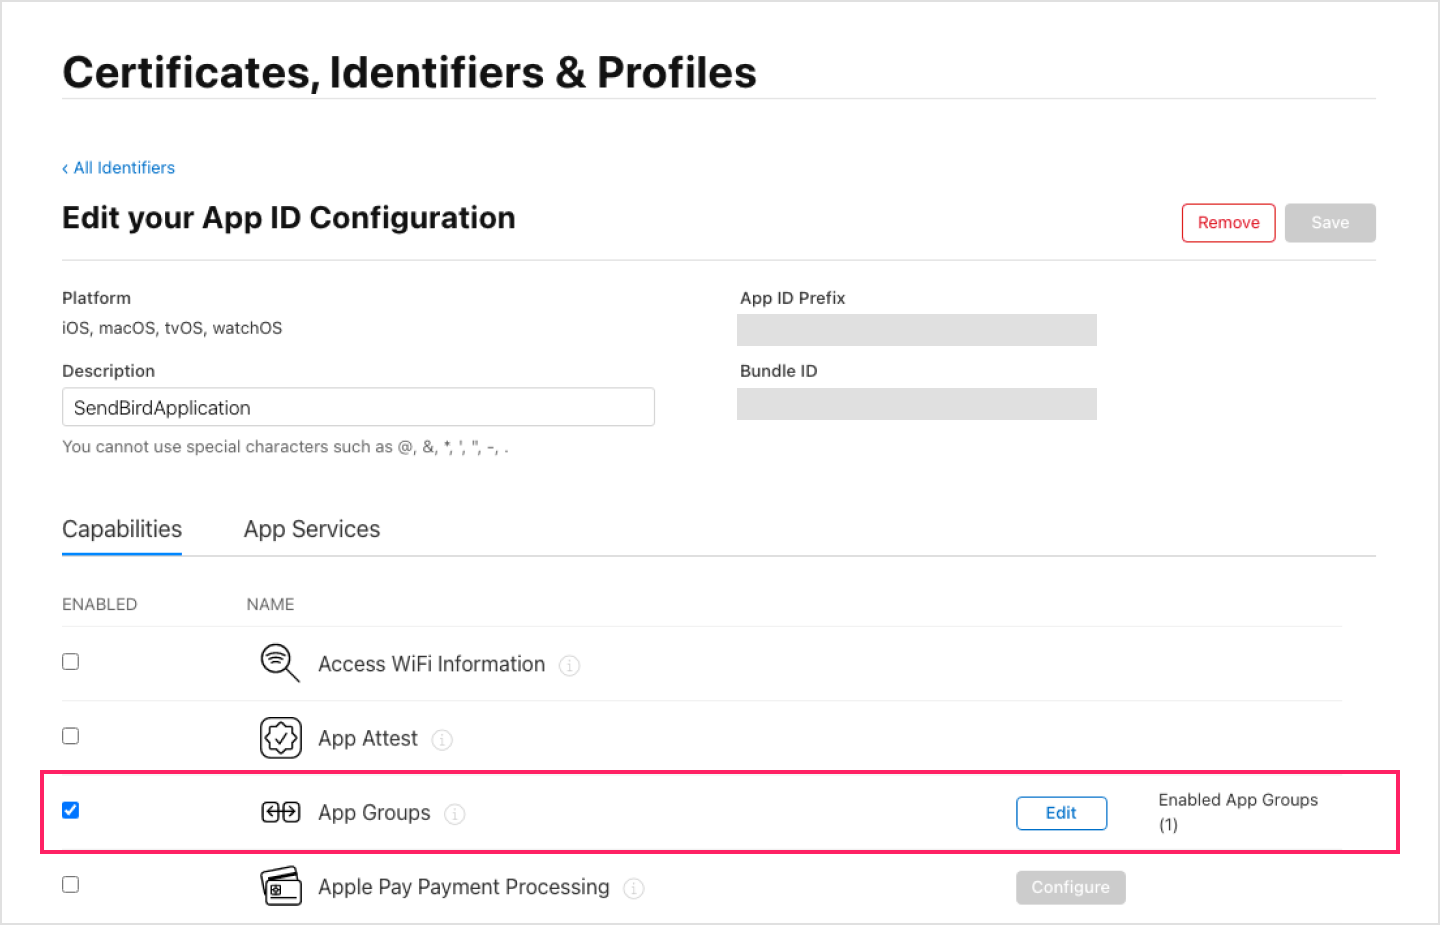 Image|Clicking App Groups to complete the Notification Service Extension configuration in the Certificates, Identifiers & Profiles.